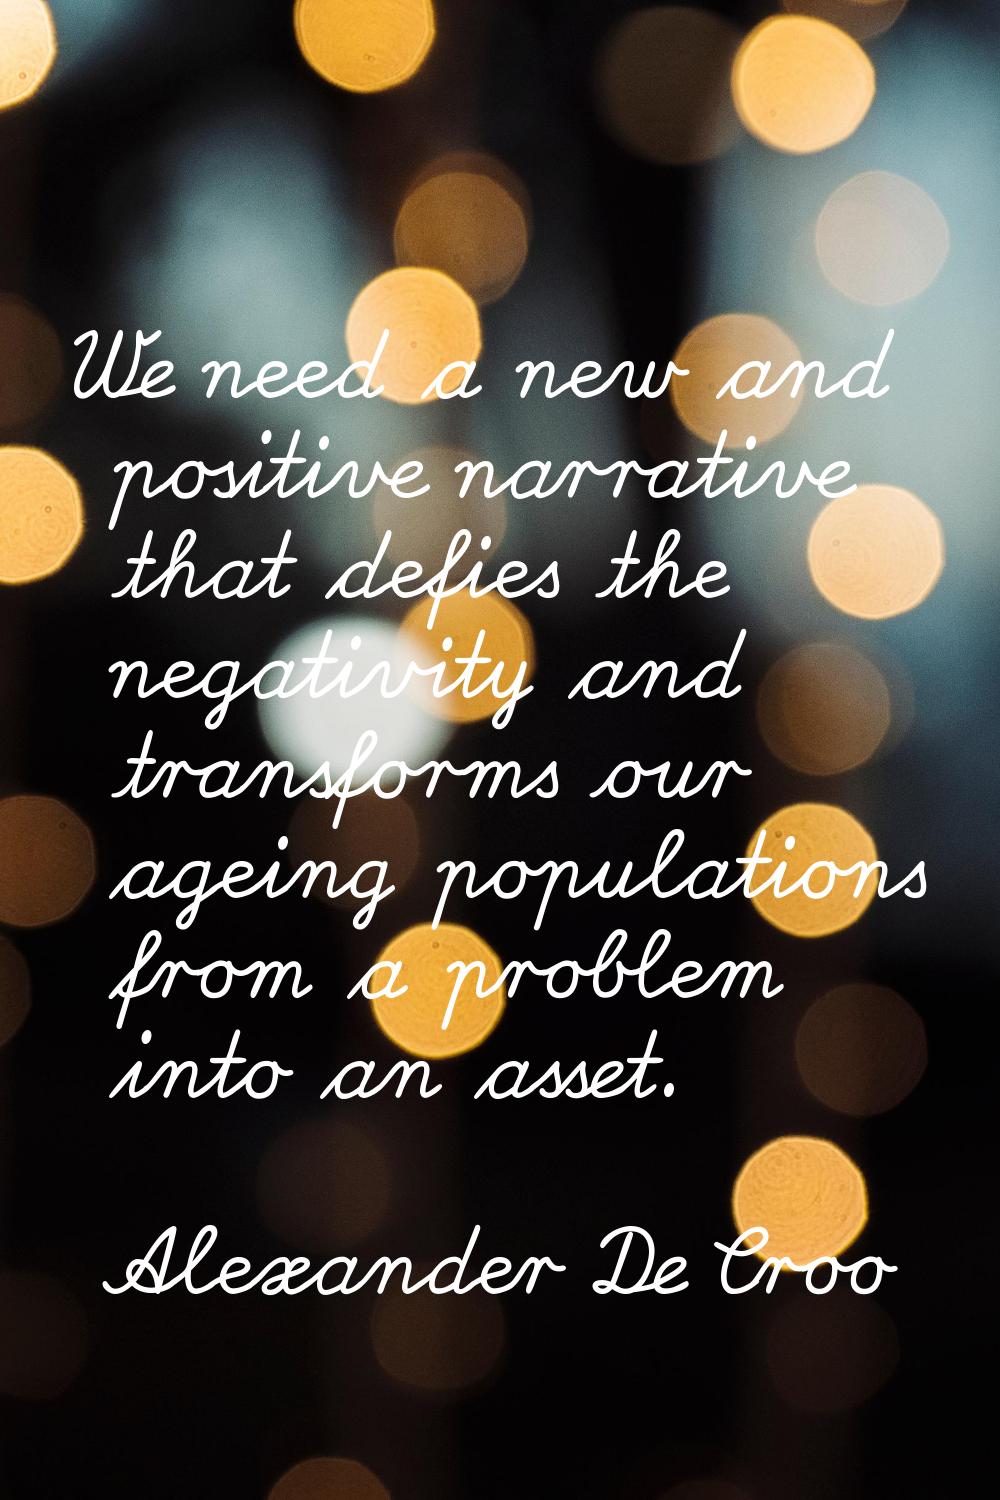 We need a new and positive narrative that defies the negativity and transforms our ageing populatio